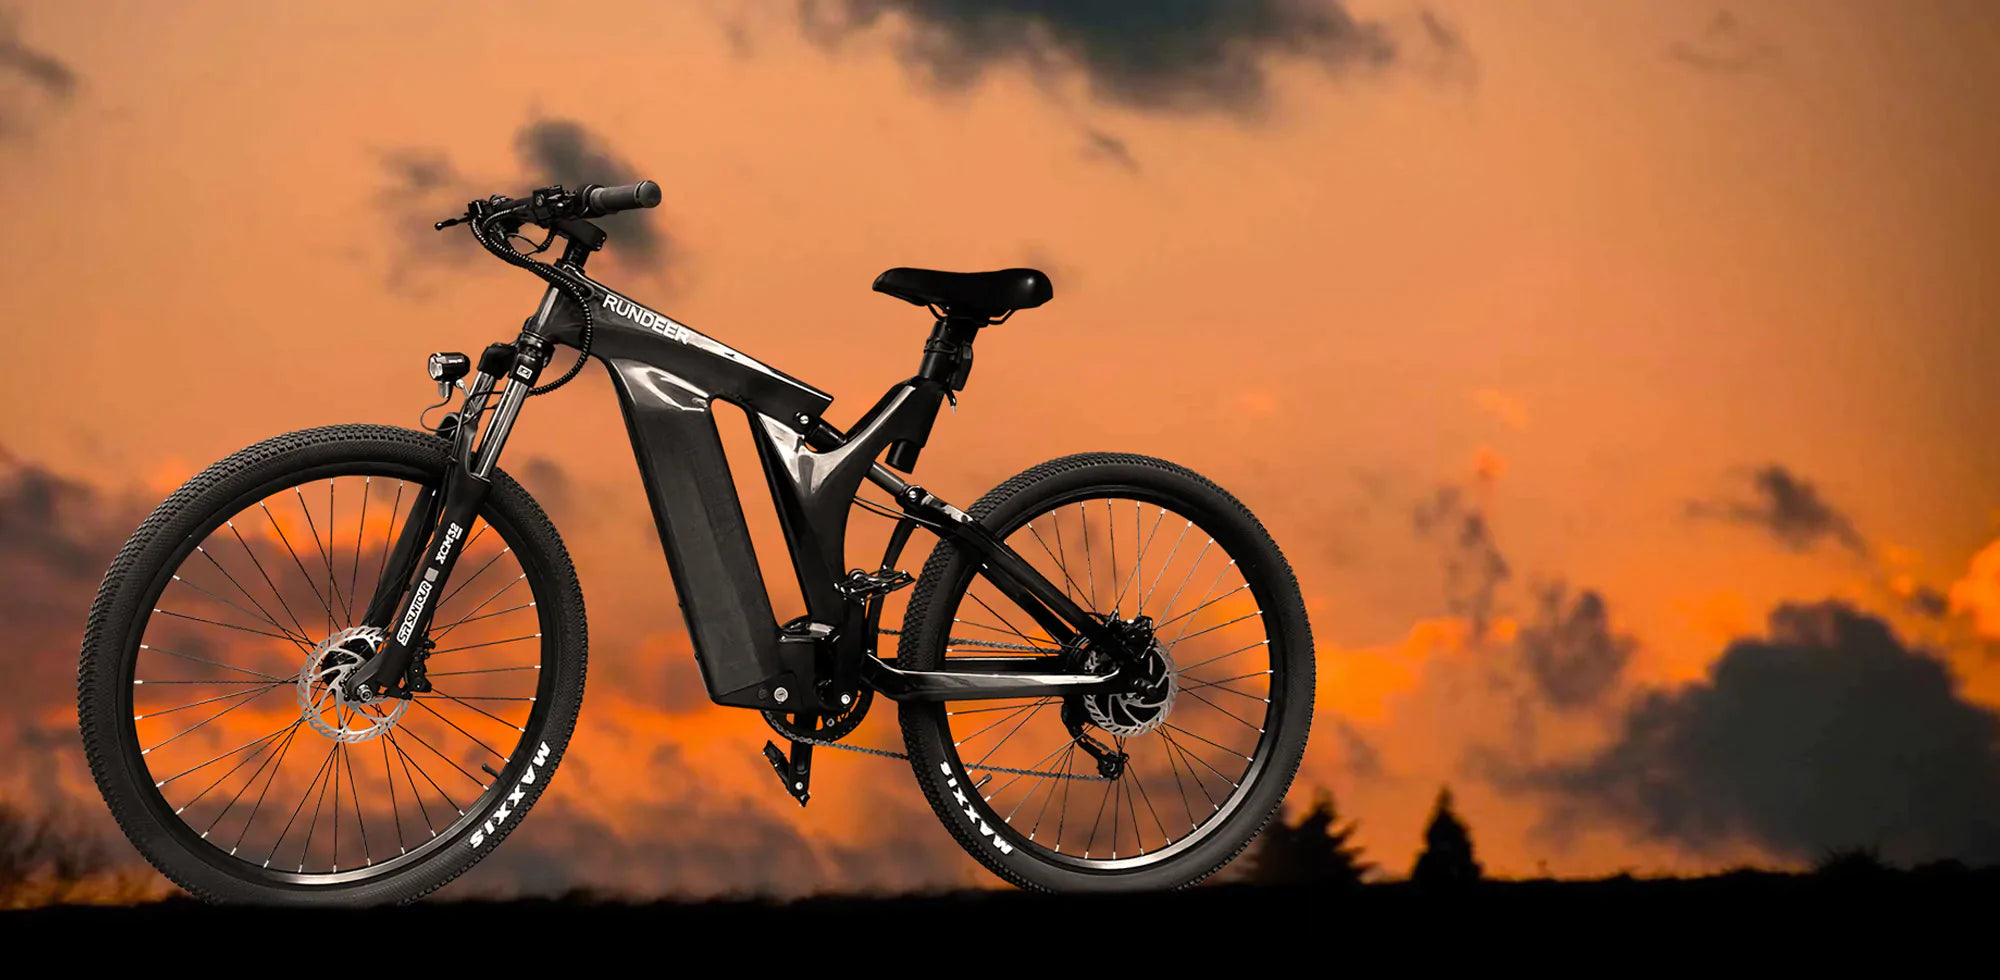 Knowing-About-Carbon-Fiber-Electric-eBike Rundeer